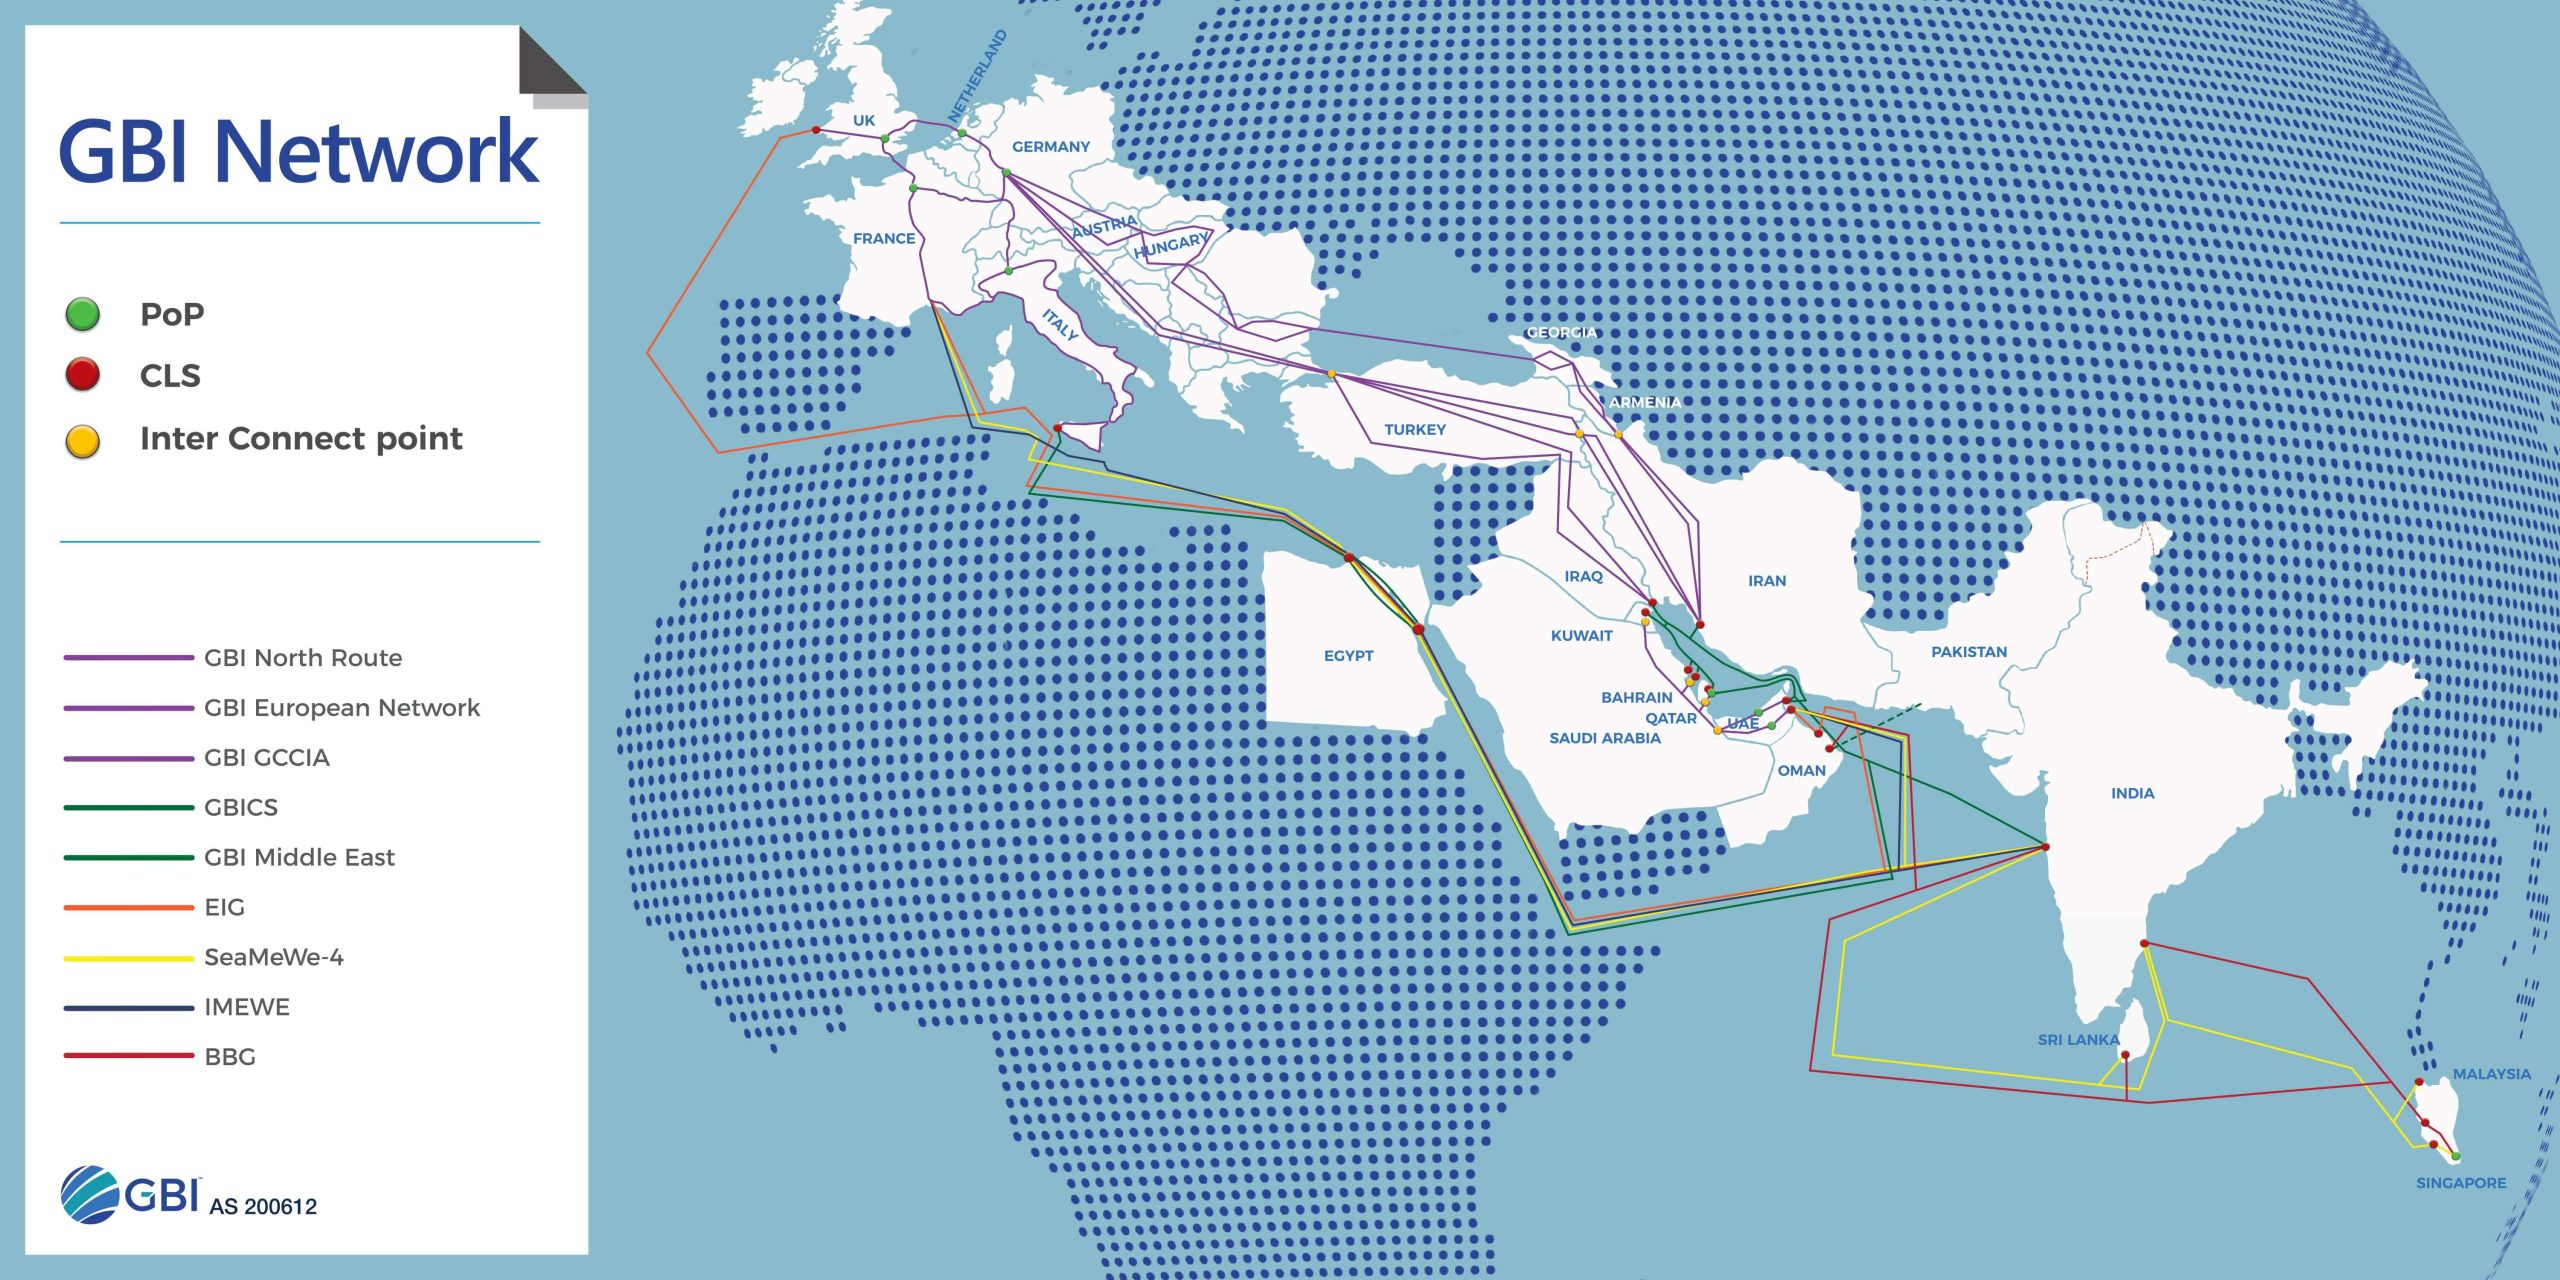 GBI’s internet network connects the Gulf to Europe through Iraq